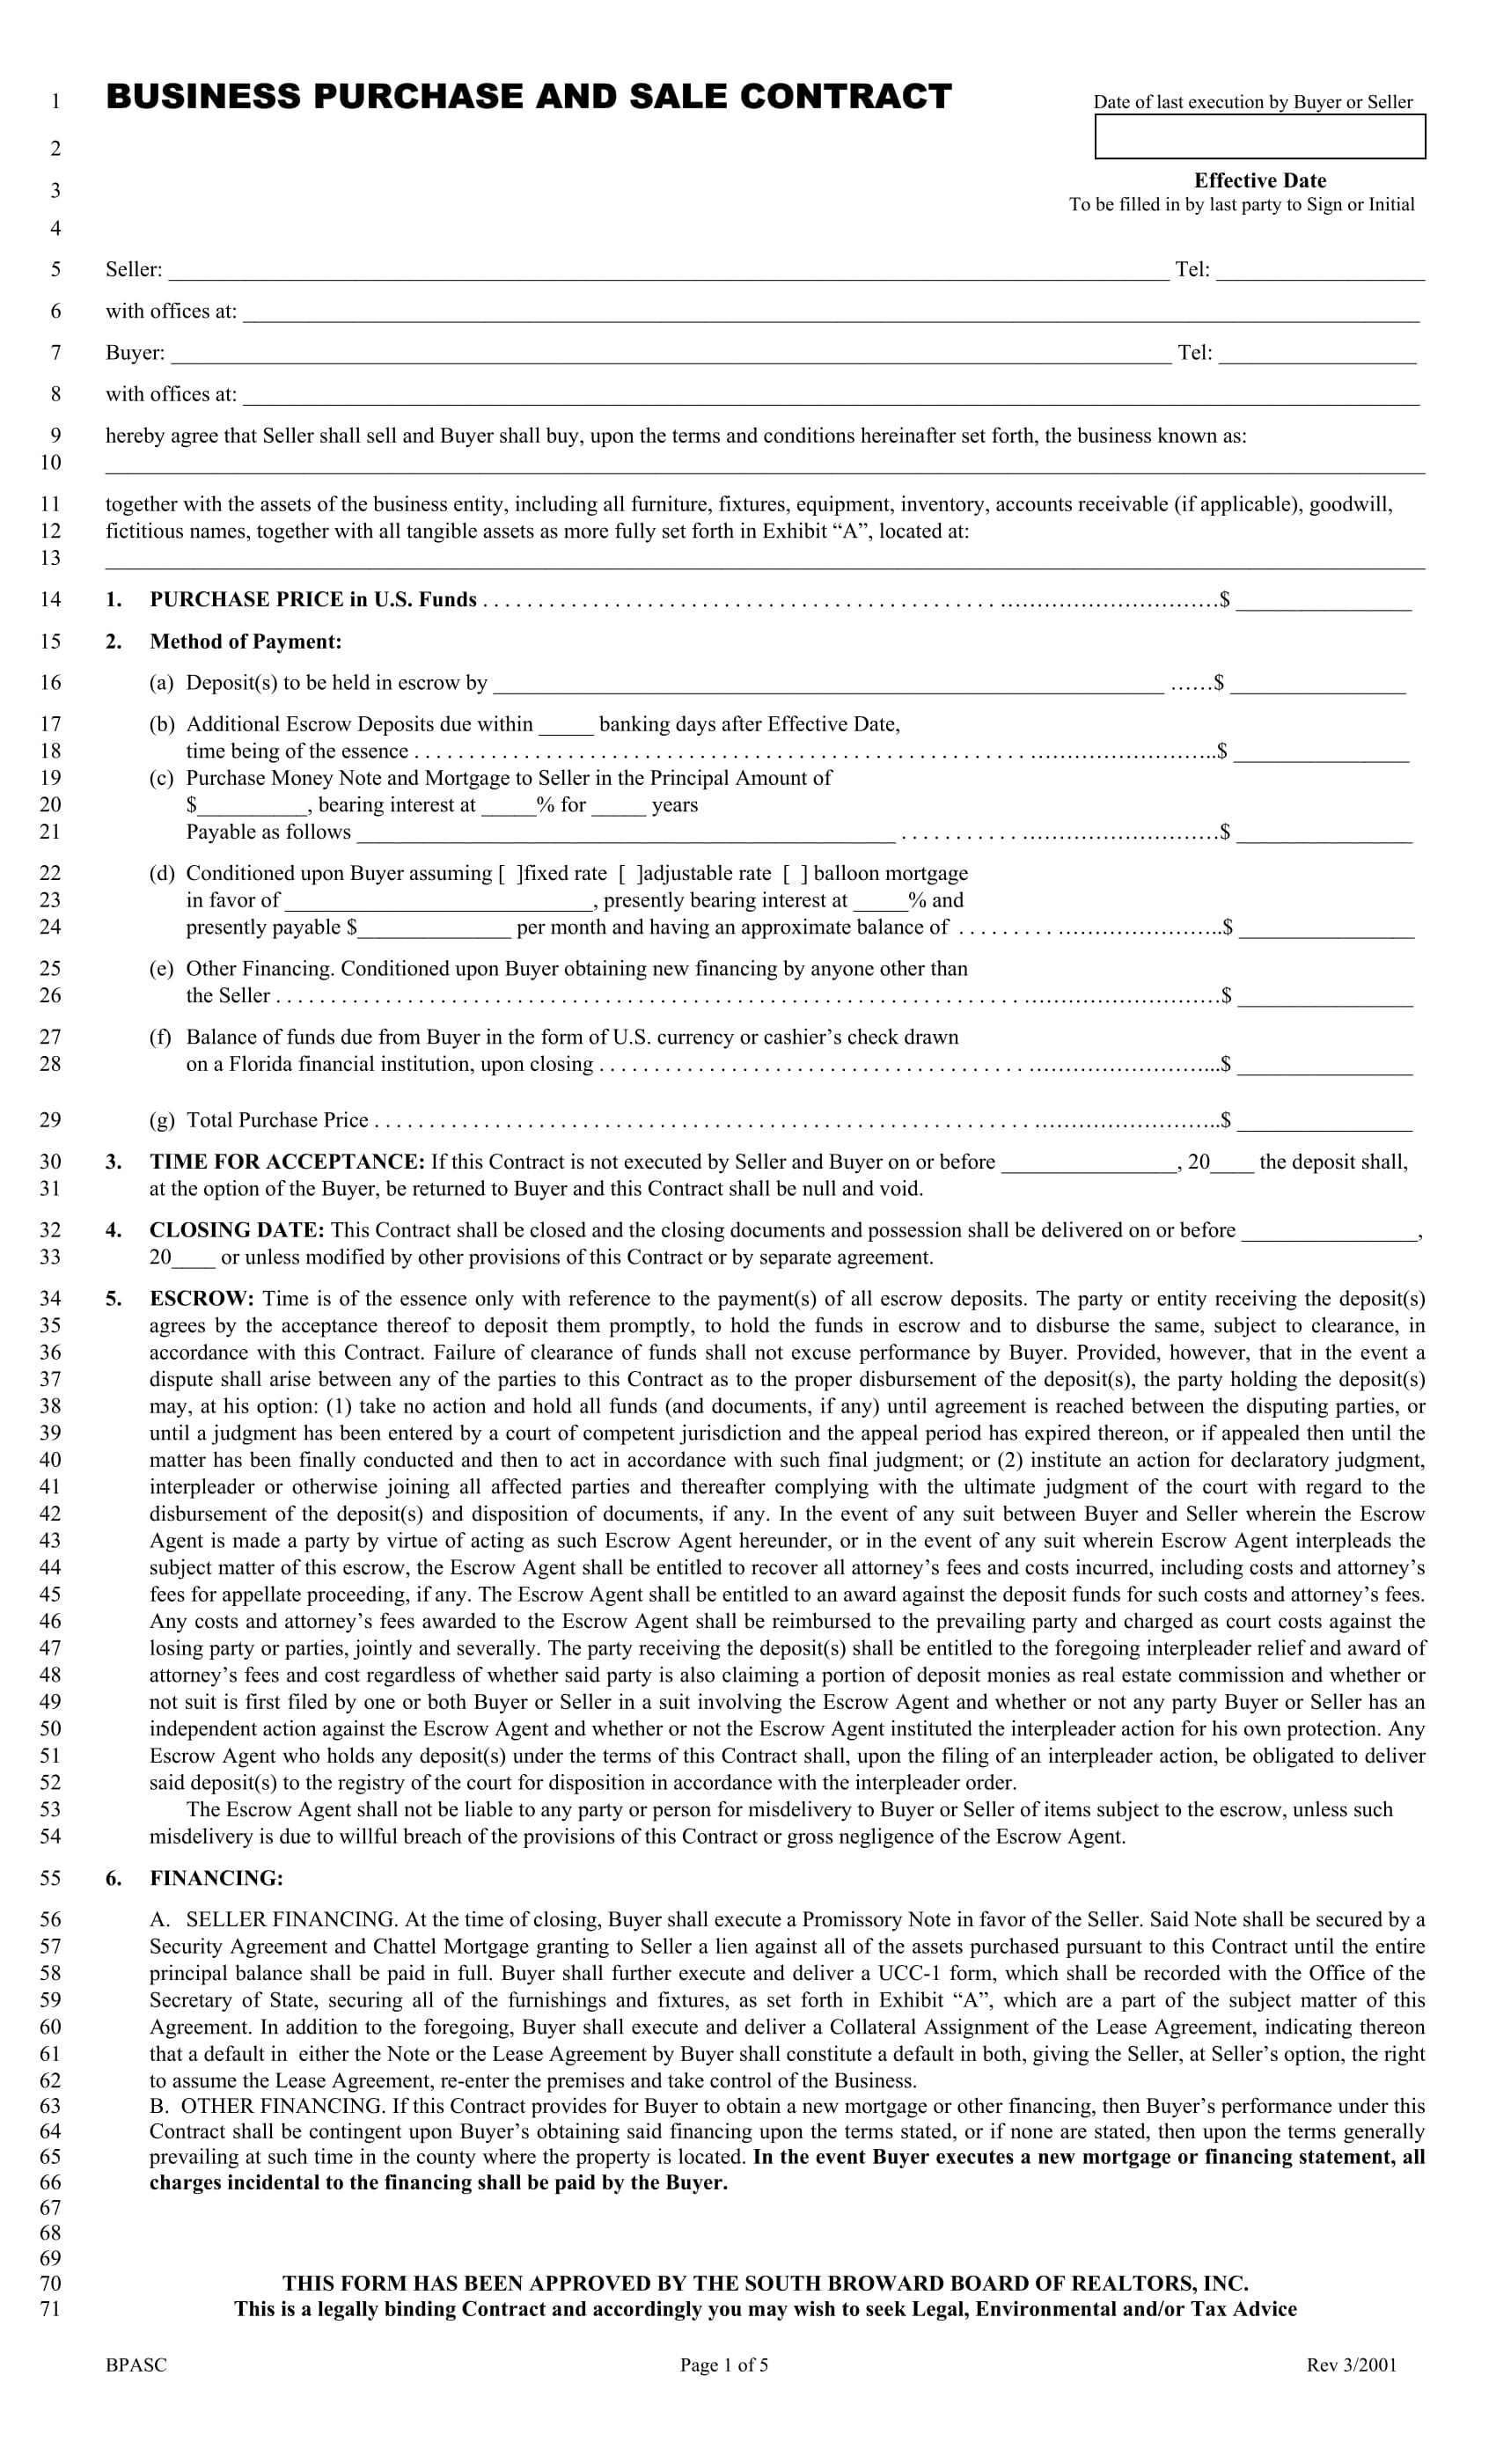 business purchase agreement form 1